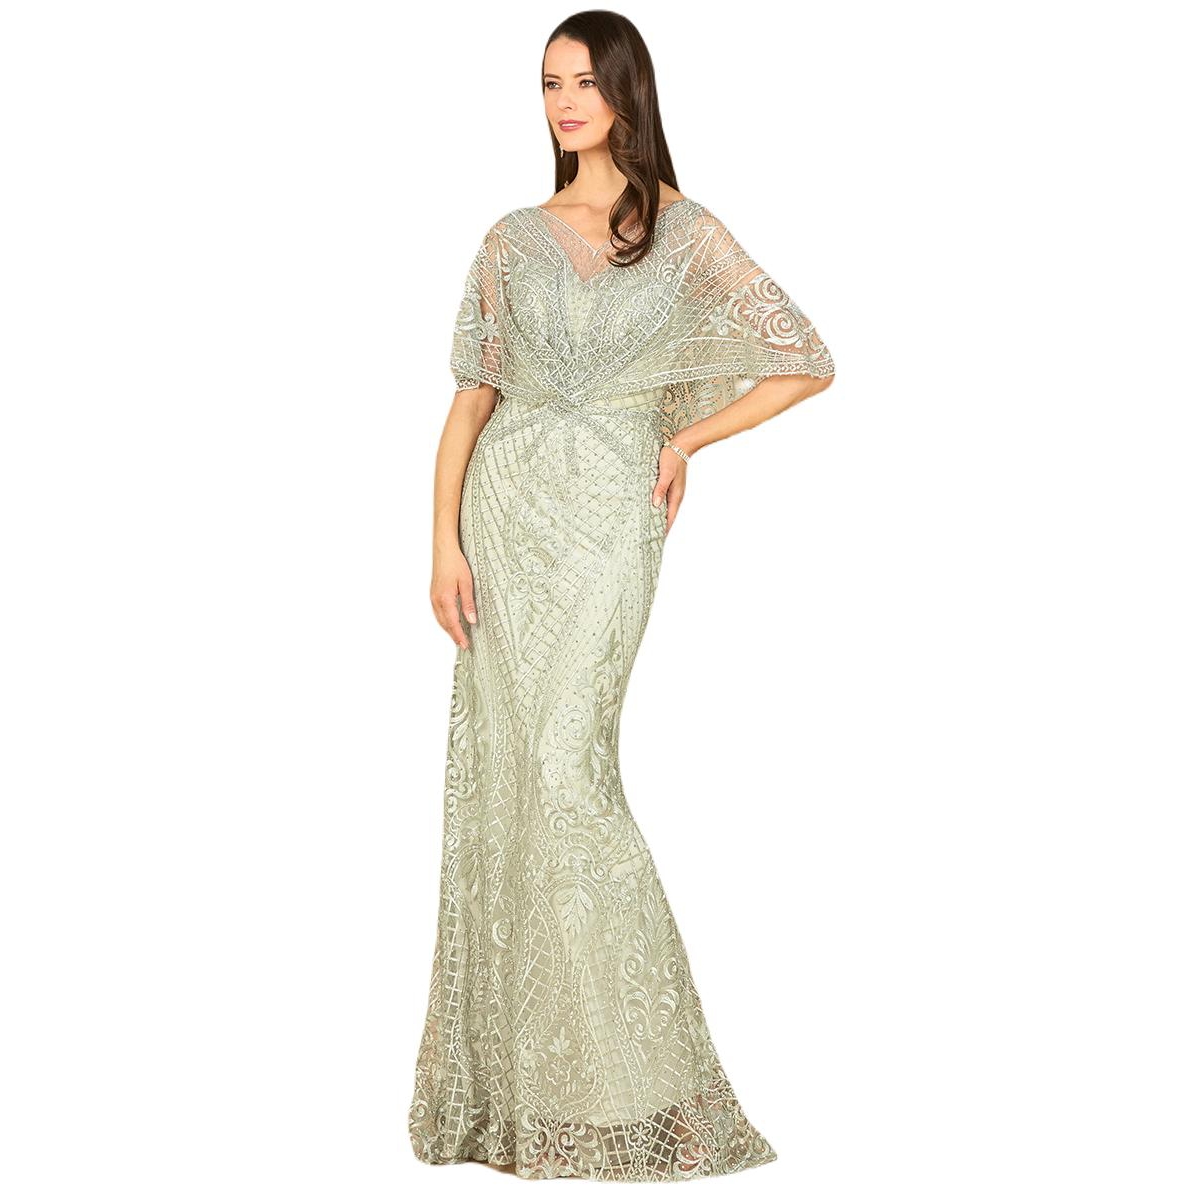 Women's Cape Sleeve Mermaid Gown - Glacial green